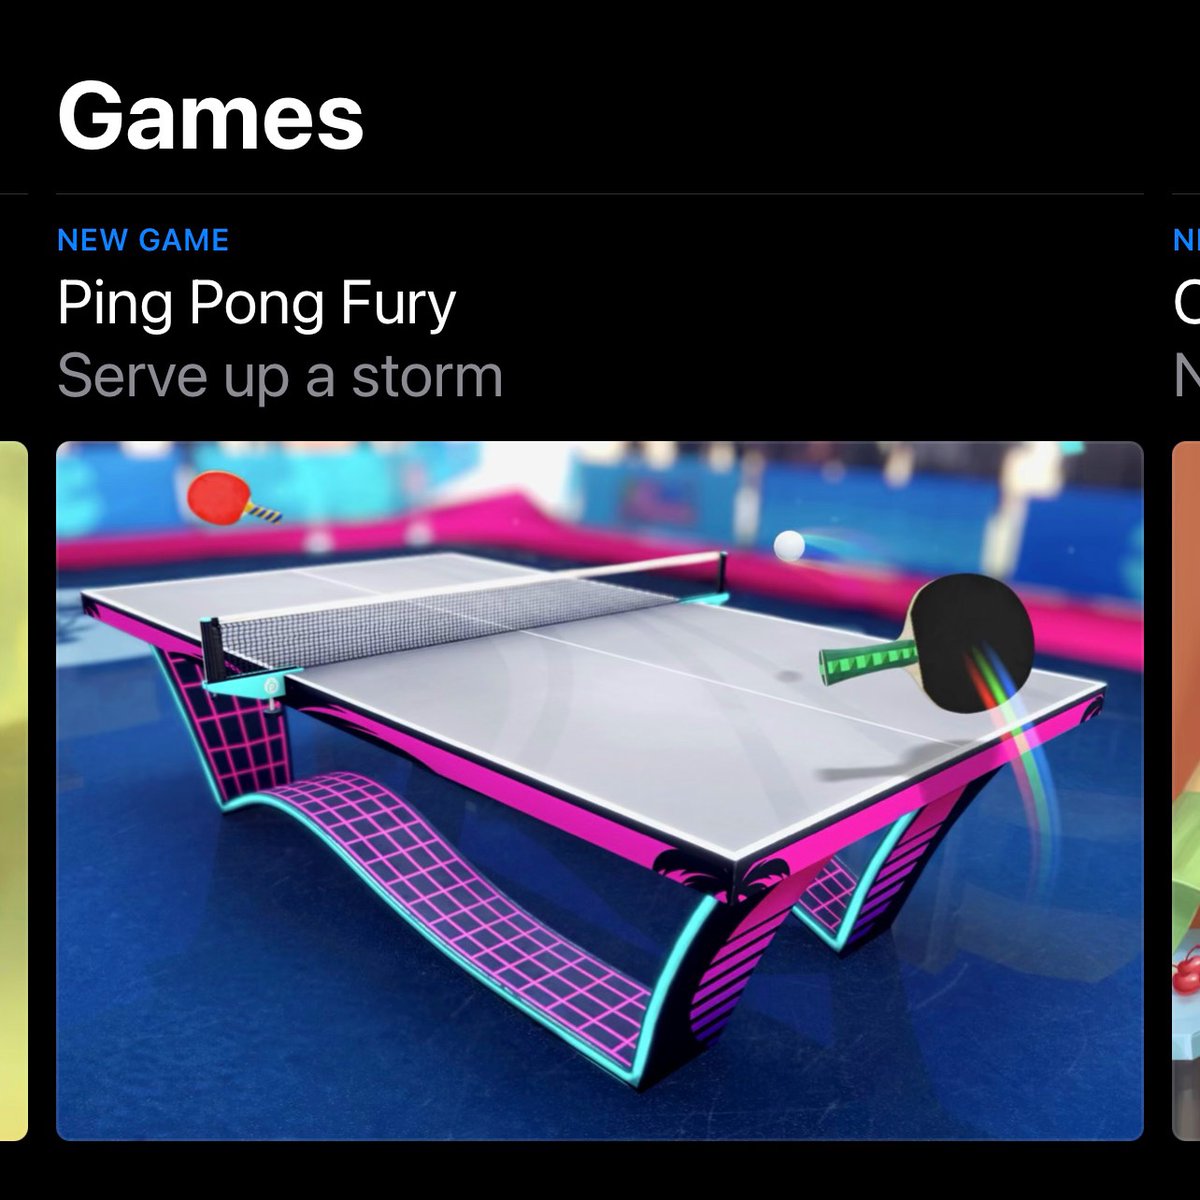 PING PONG FURY - PRO PLAYER WITH KILLER SERVES - ARENA 10 LAS VEGAS 